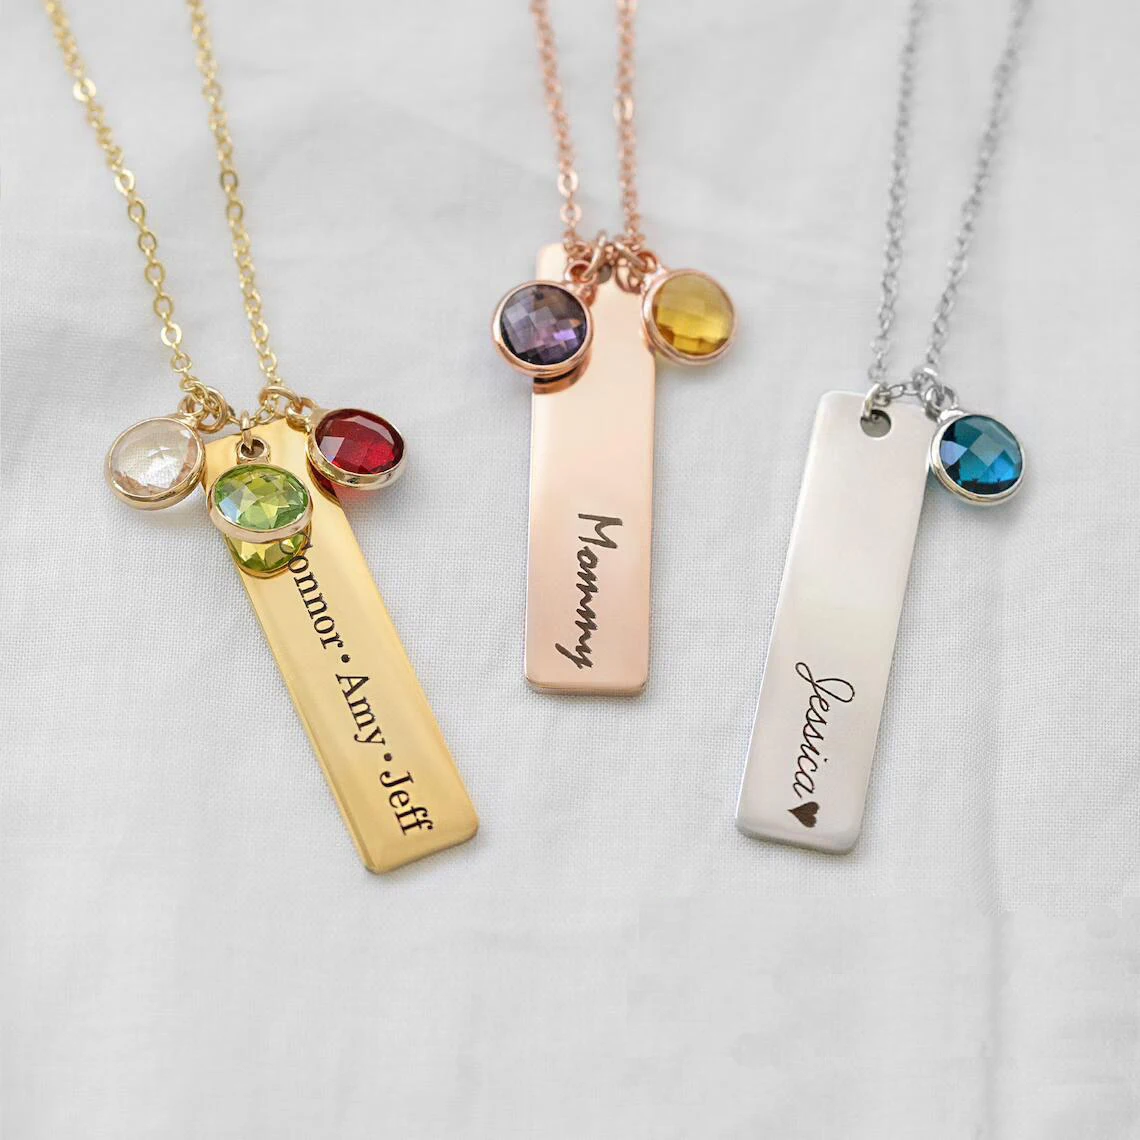 Custom Engraved Names Date Stainless Steel Round Pendant Necklace  Personalization Included Text Free with Chain Gift for Lovers